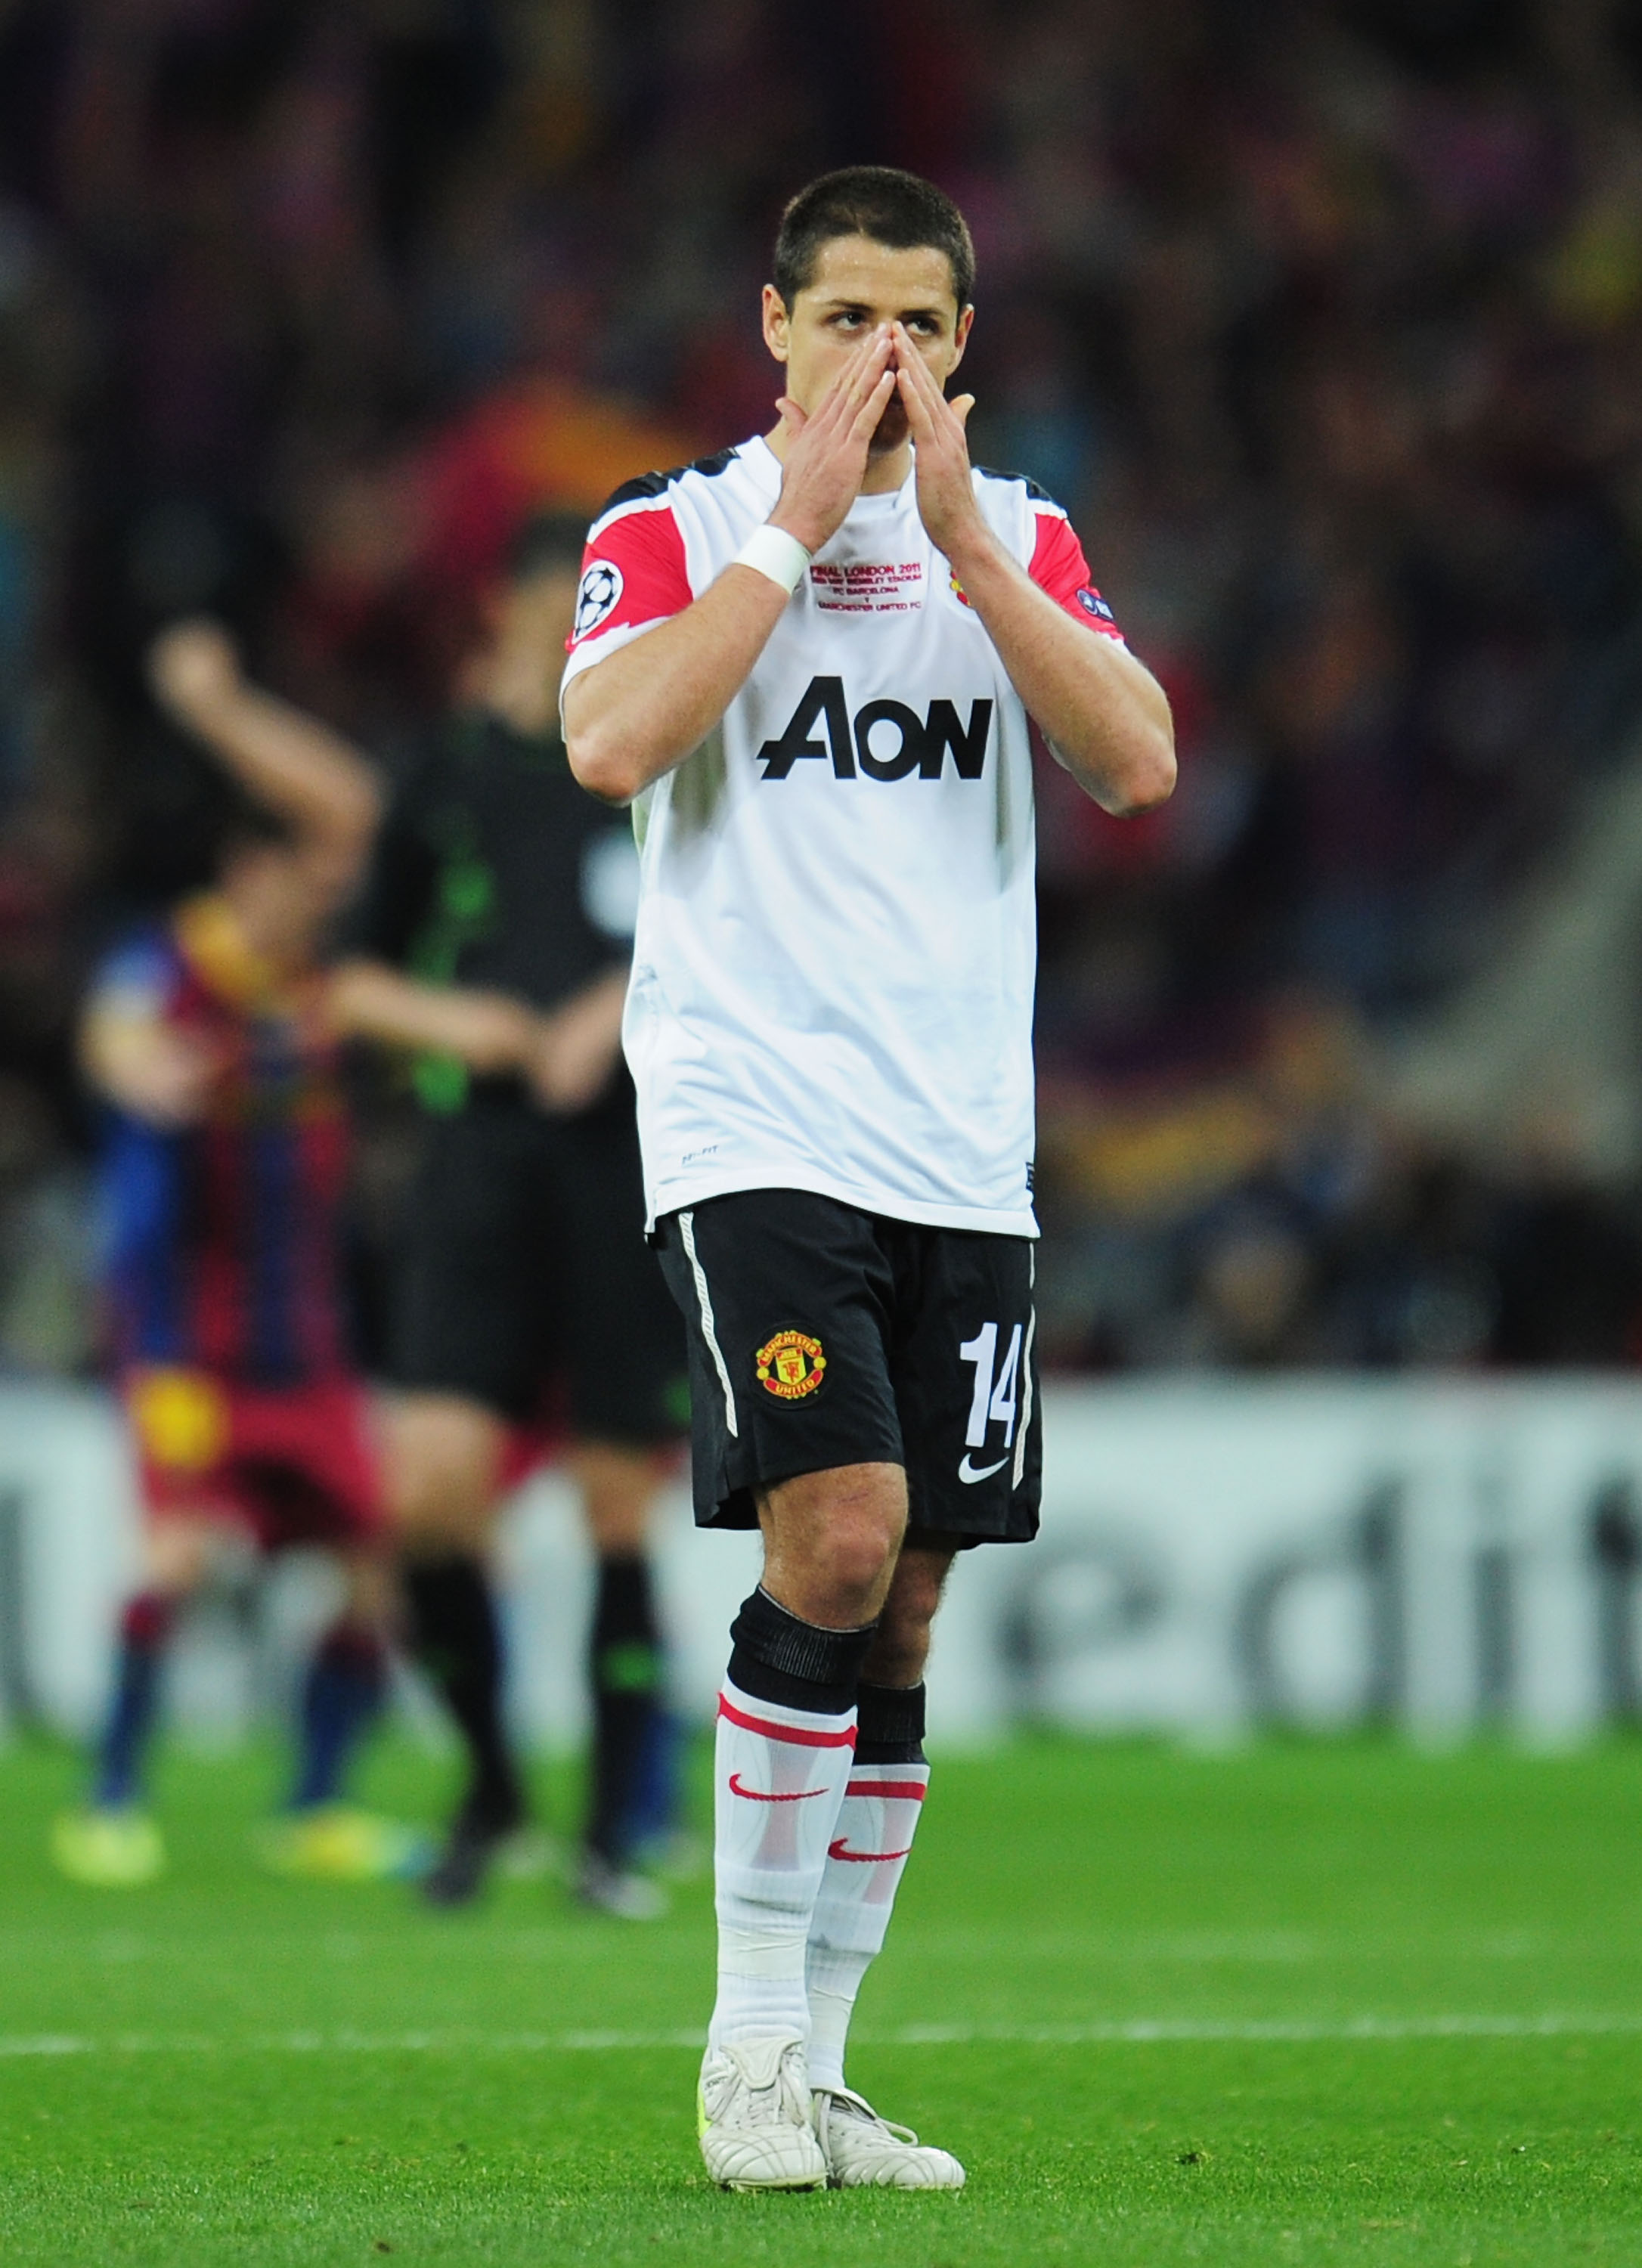 LONDON, ENGLAND - MAY 28:  Javier Hernandez of Manchester United shows his dejection after the UEFA Champions League final between FC Barcelona and Manchester United FC at Wembley Stadium on May 28, 2011 in London, England.  (Photo by Shaun Botterill/Gett